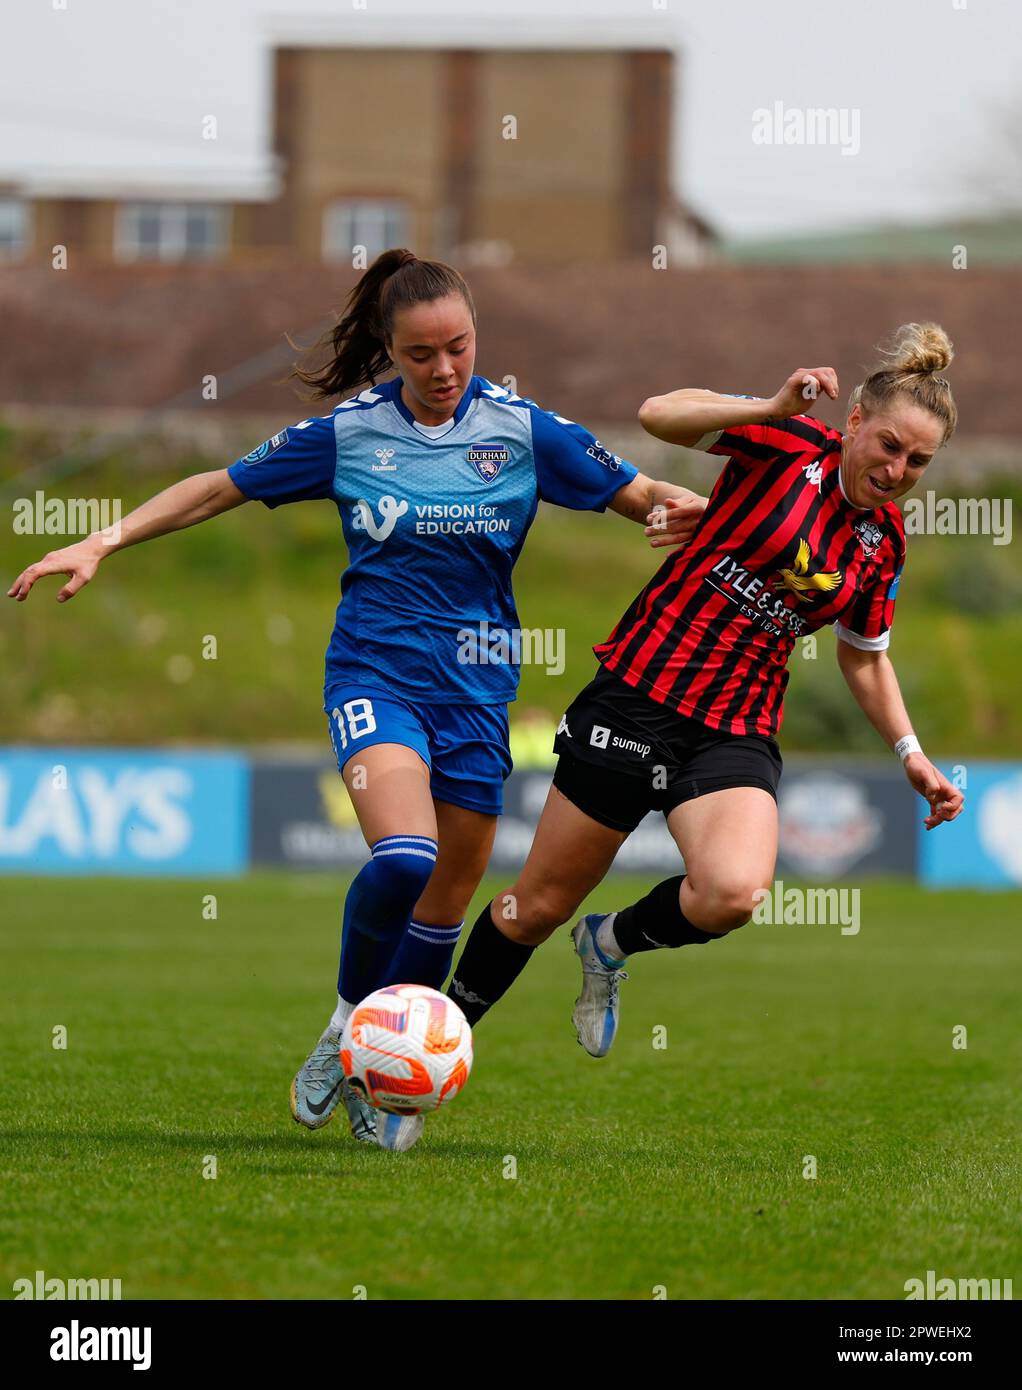 Lewes, UK. 30th Apr, 2023. Lewes, England, April 30th 2023: Grace Ayre (18 Durham) and Nat Johnson (7 Lewes) battle for the ball during the FA Womens Championship football match between Lewes and Durham at the Dripping Pan in Lewes, England. (James Whitehead/SPP) Credit: SPP Sport Press Photo. /Alamy Live News Stock Photo